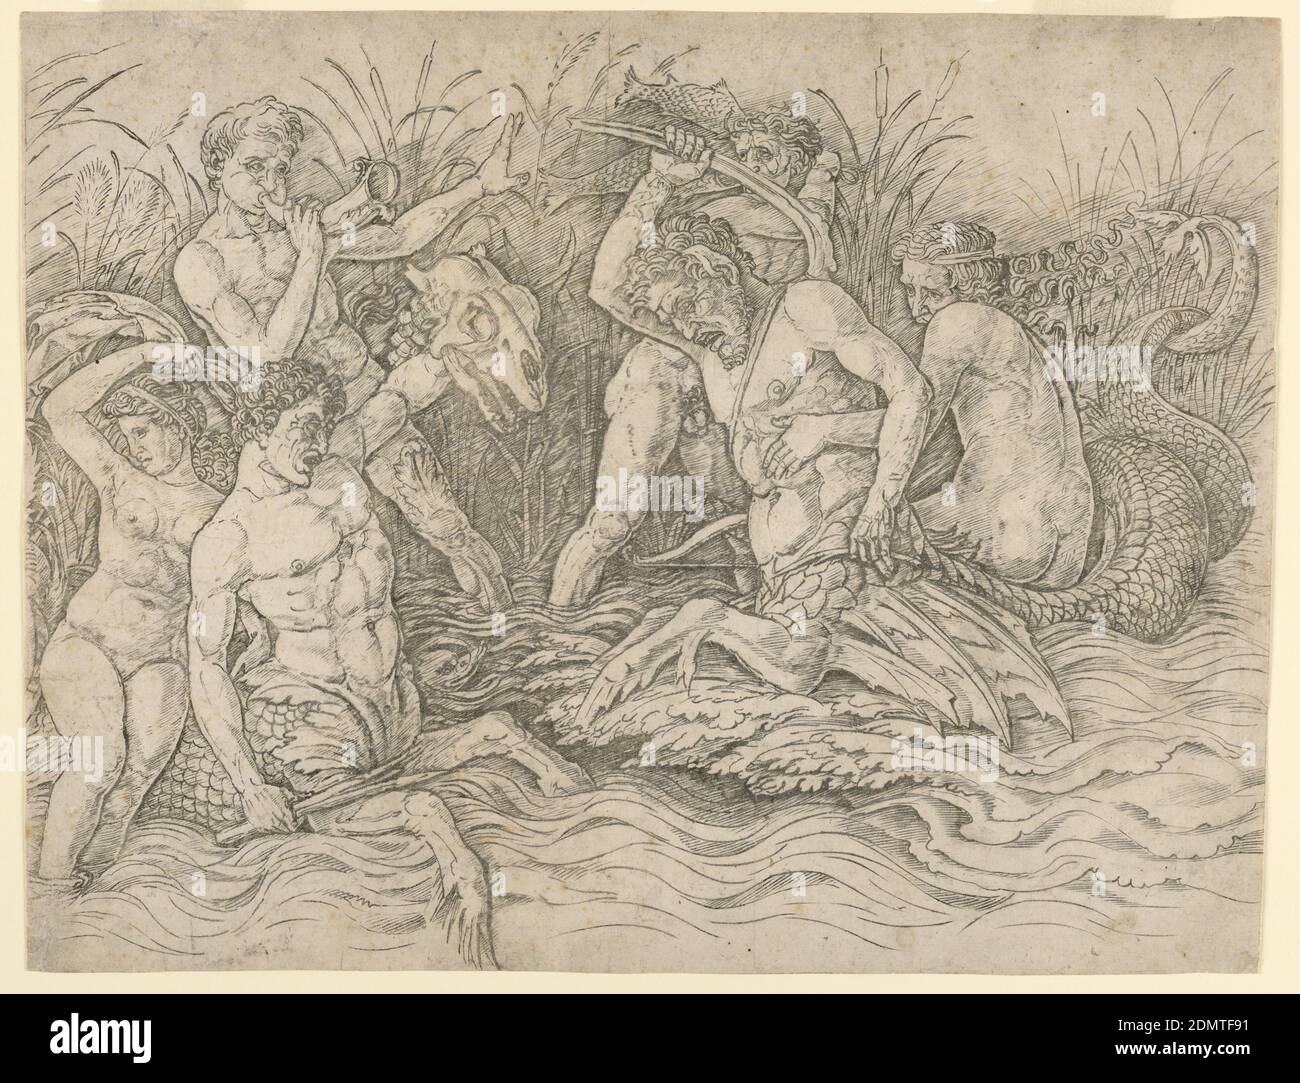 Battle of the Sea Gods, right half, Andrea Mantegna, Italian, ca. 1431 - 1506, Engraving on laid paper, In marshy shallows, three male sea gods battle each other and two water satyrs. The water satyr on the left, armed with a club and a monster's head, is carrying a sea nymph on his back, who looks away from the battle in fear. The sea satyr on the right is armed with a hatchet and struggles to resist the grip of a sea god behind him. Meanwhile, another sea god blows a horn to rouse the spirits of the fighters, while the third is whacking left-and-right at the sea-satyrs with two fish. Stock Photo